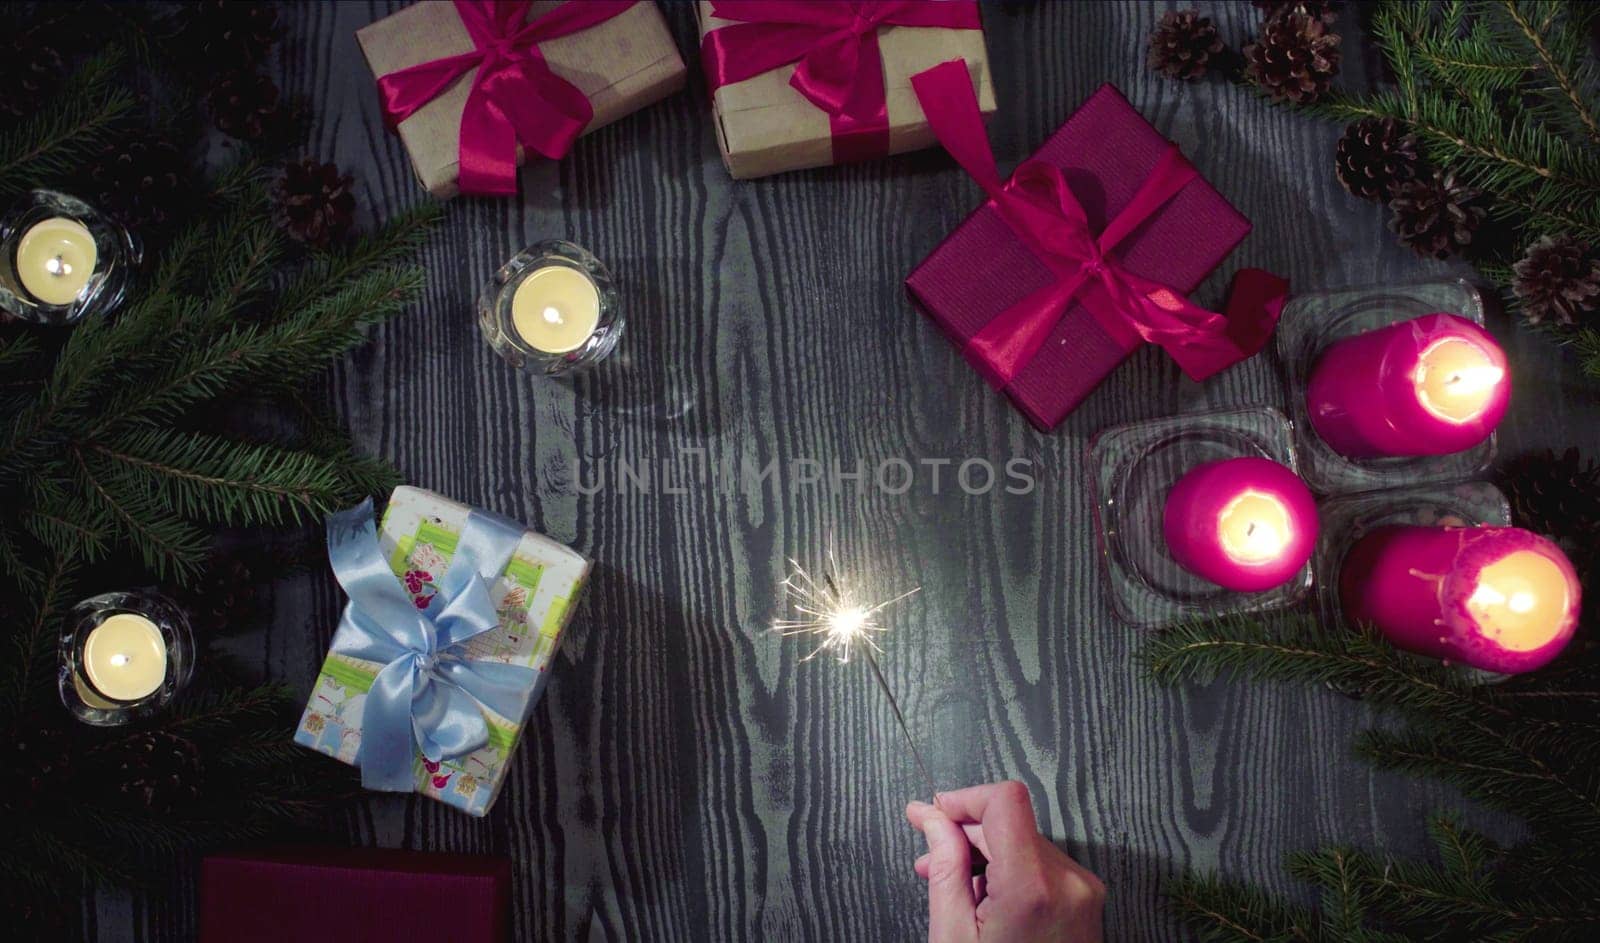 Top view female hand holding a sparkler. Table with Christmas decorations